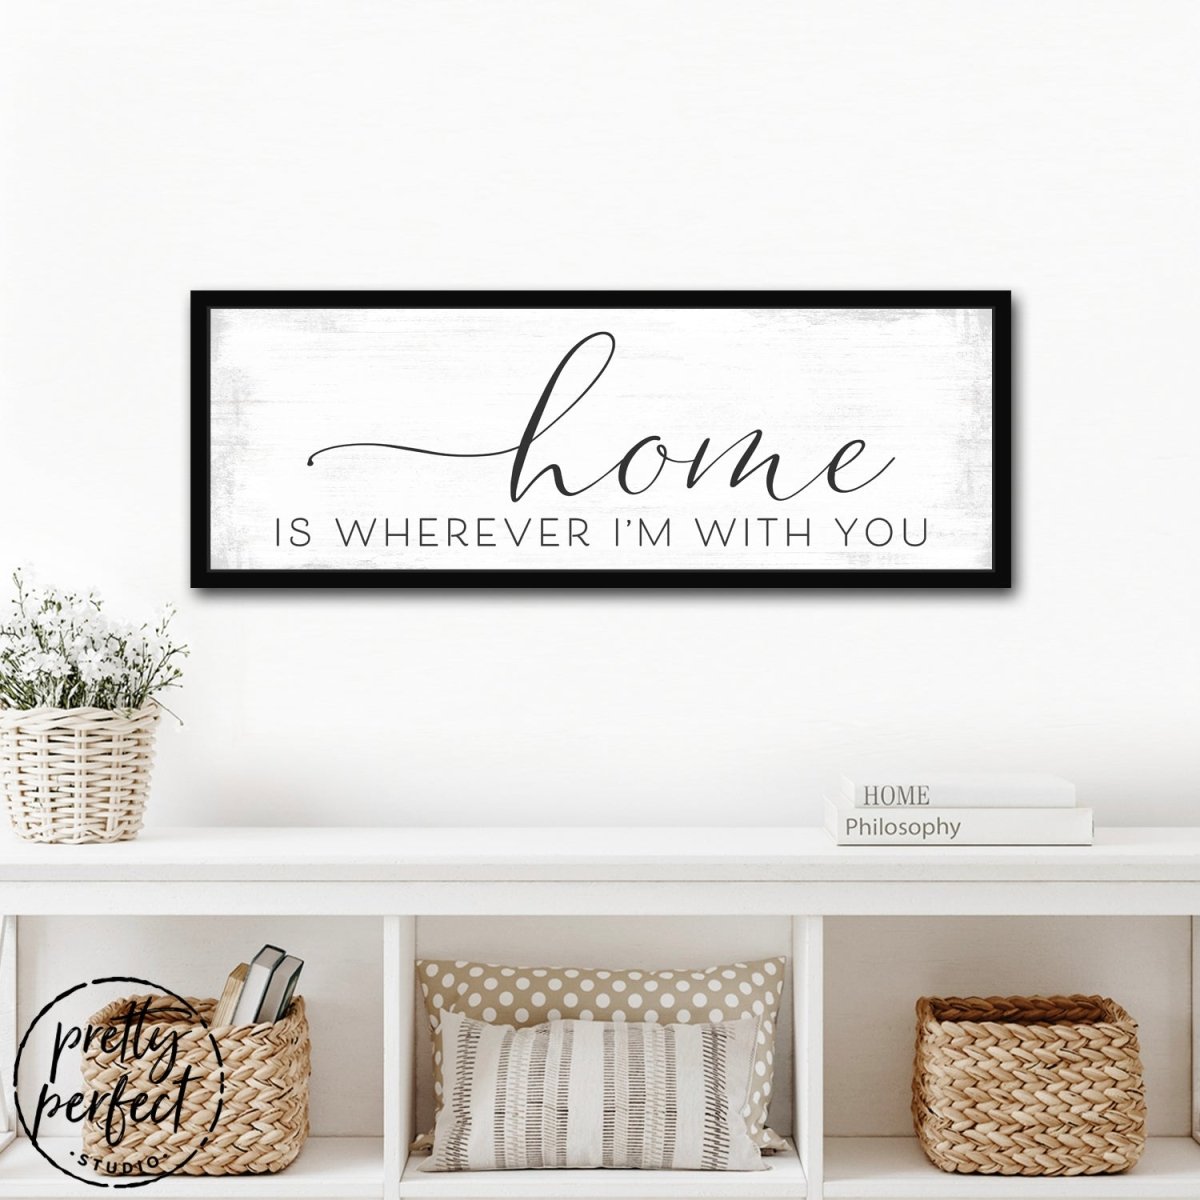 Home Is Wherever I'm With You Sign With Lowercase Text in Living Room - Pretty Perfect Studio